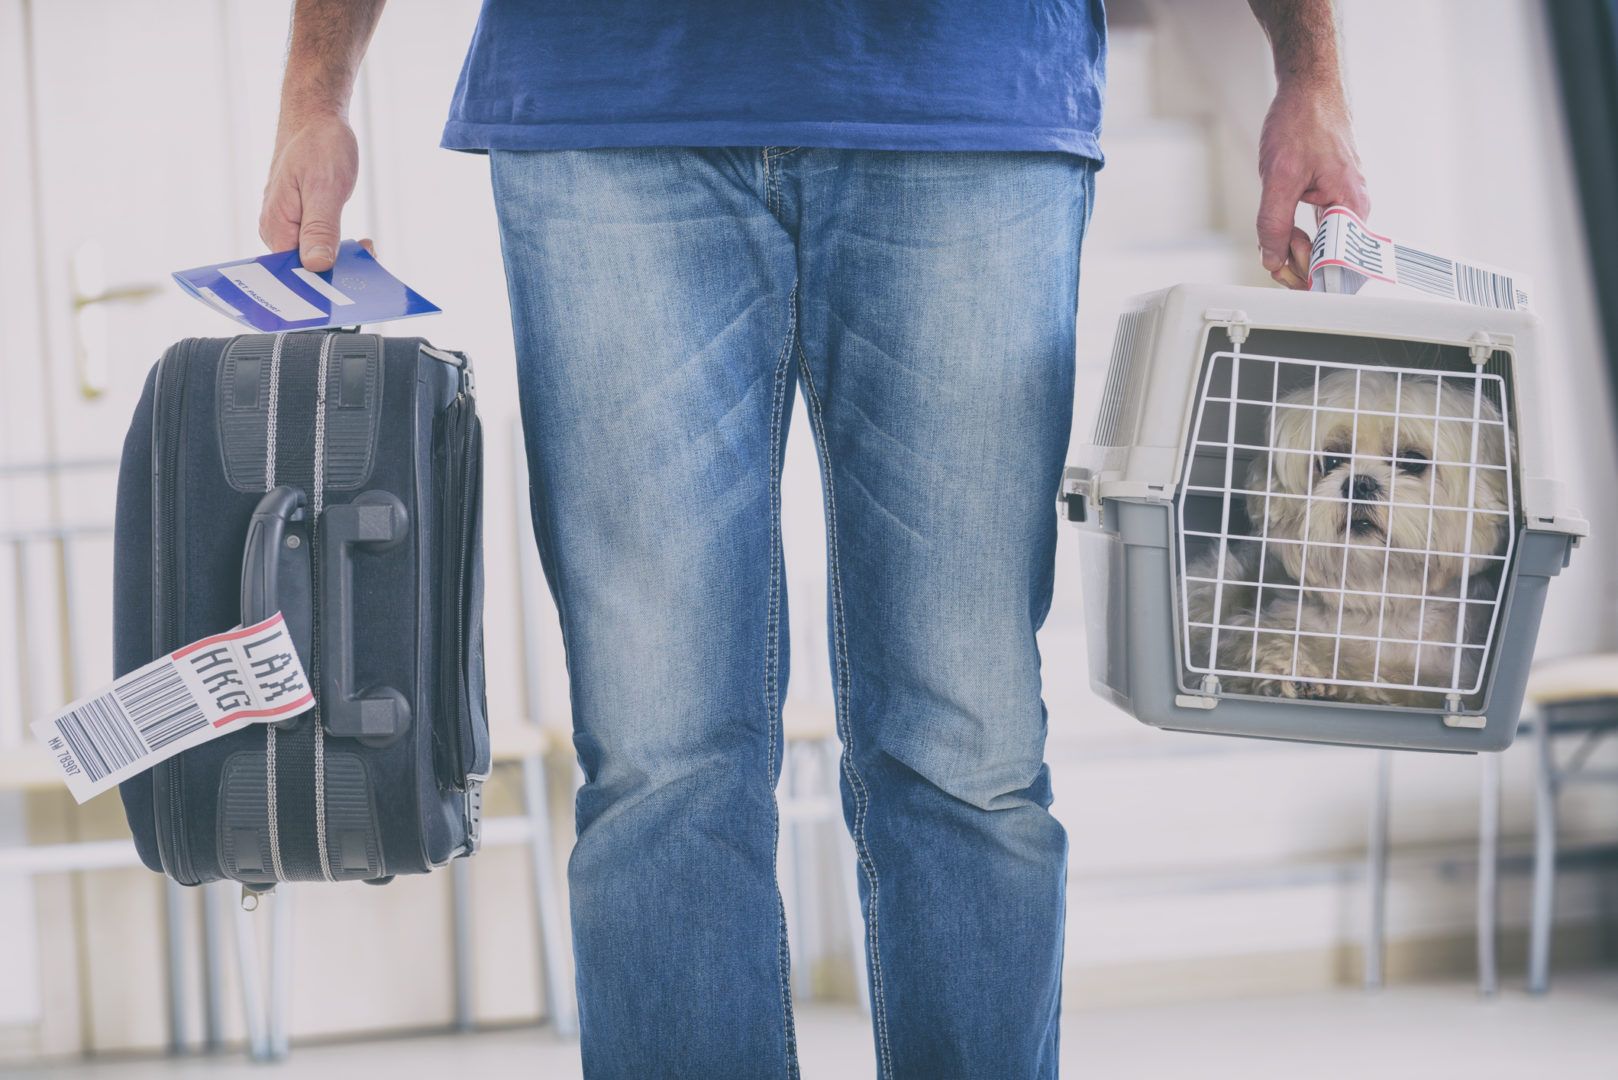 How to fly with a dog: General rules, cost and travel tips